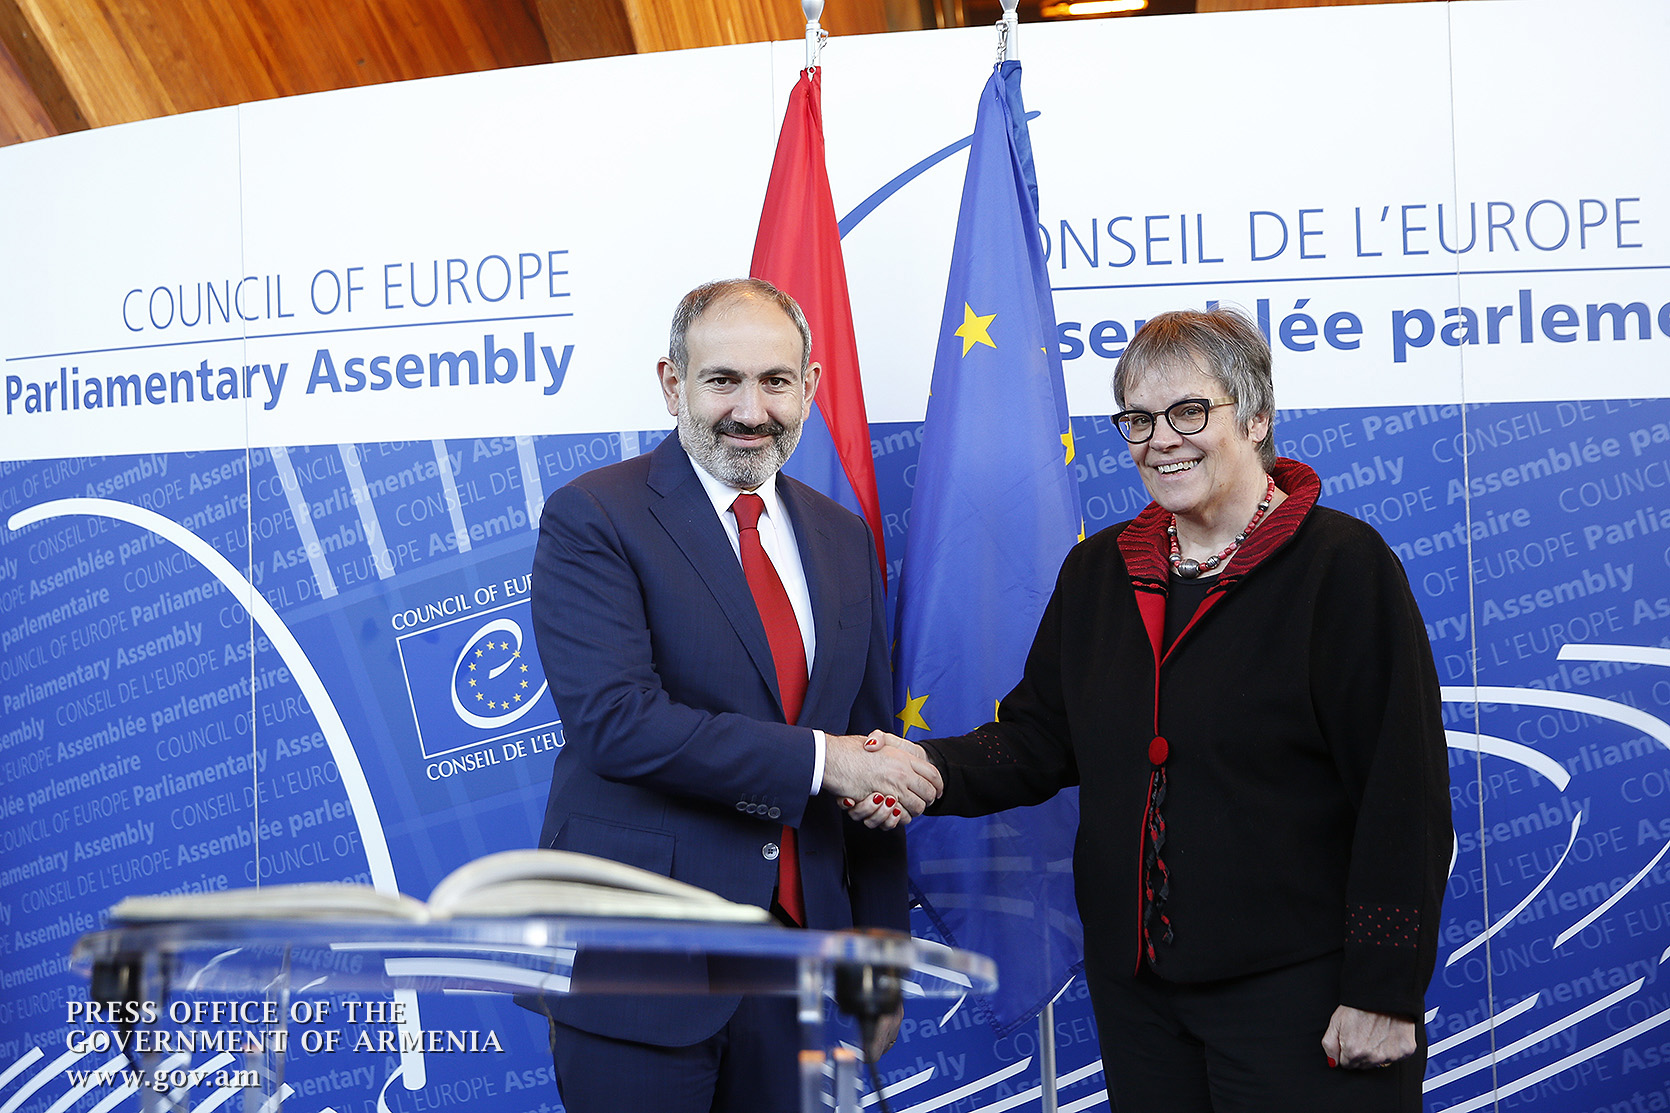 Nikol Pashinyan’s visit to the Council of Europe kicks off: PM meets with PACE President Liliane Maury Pasquier